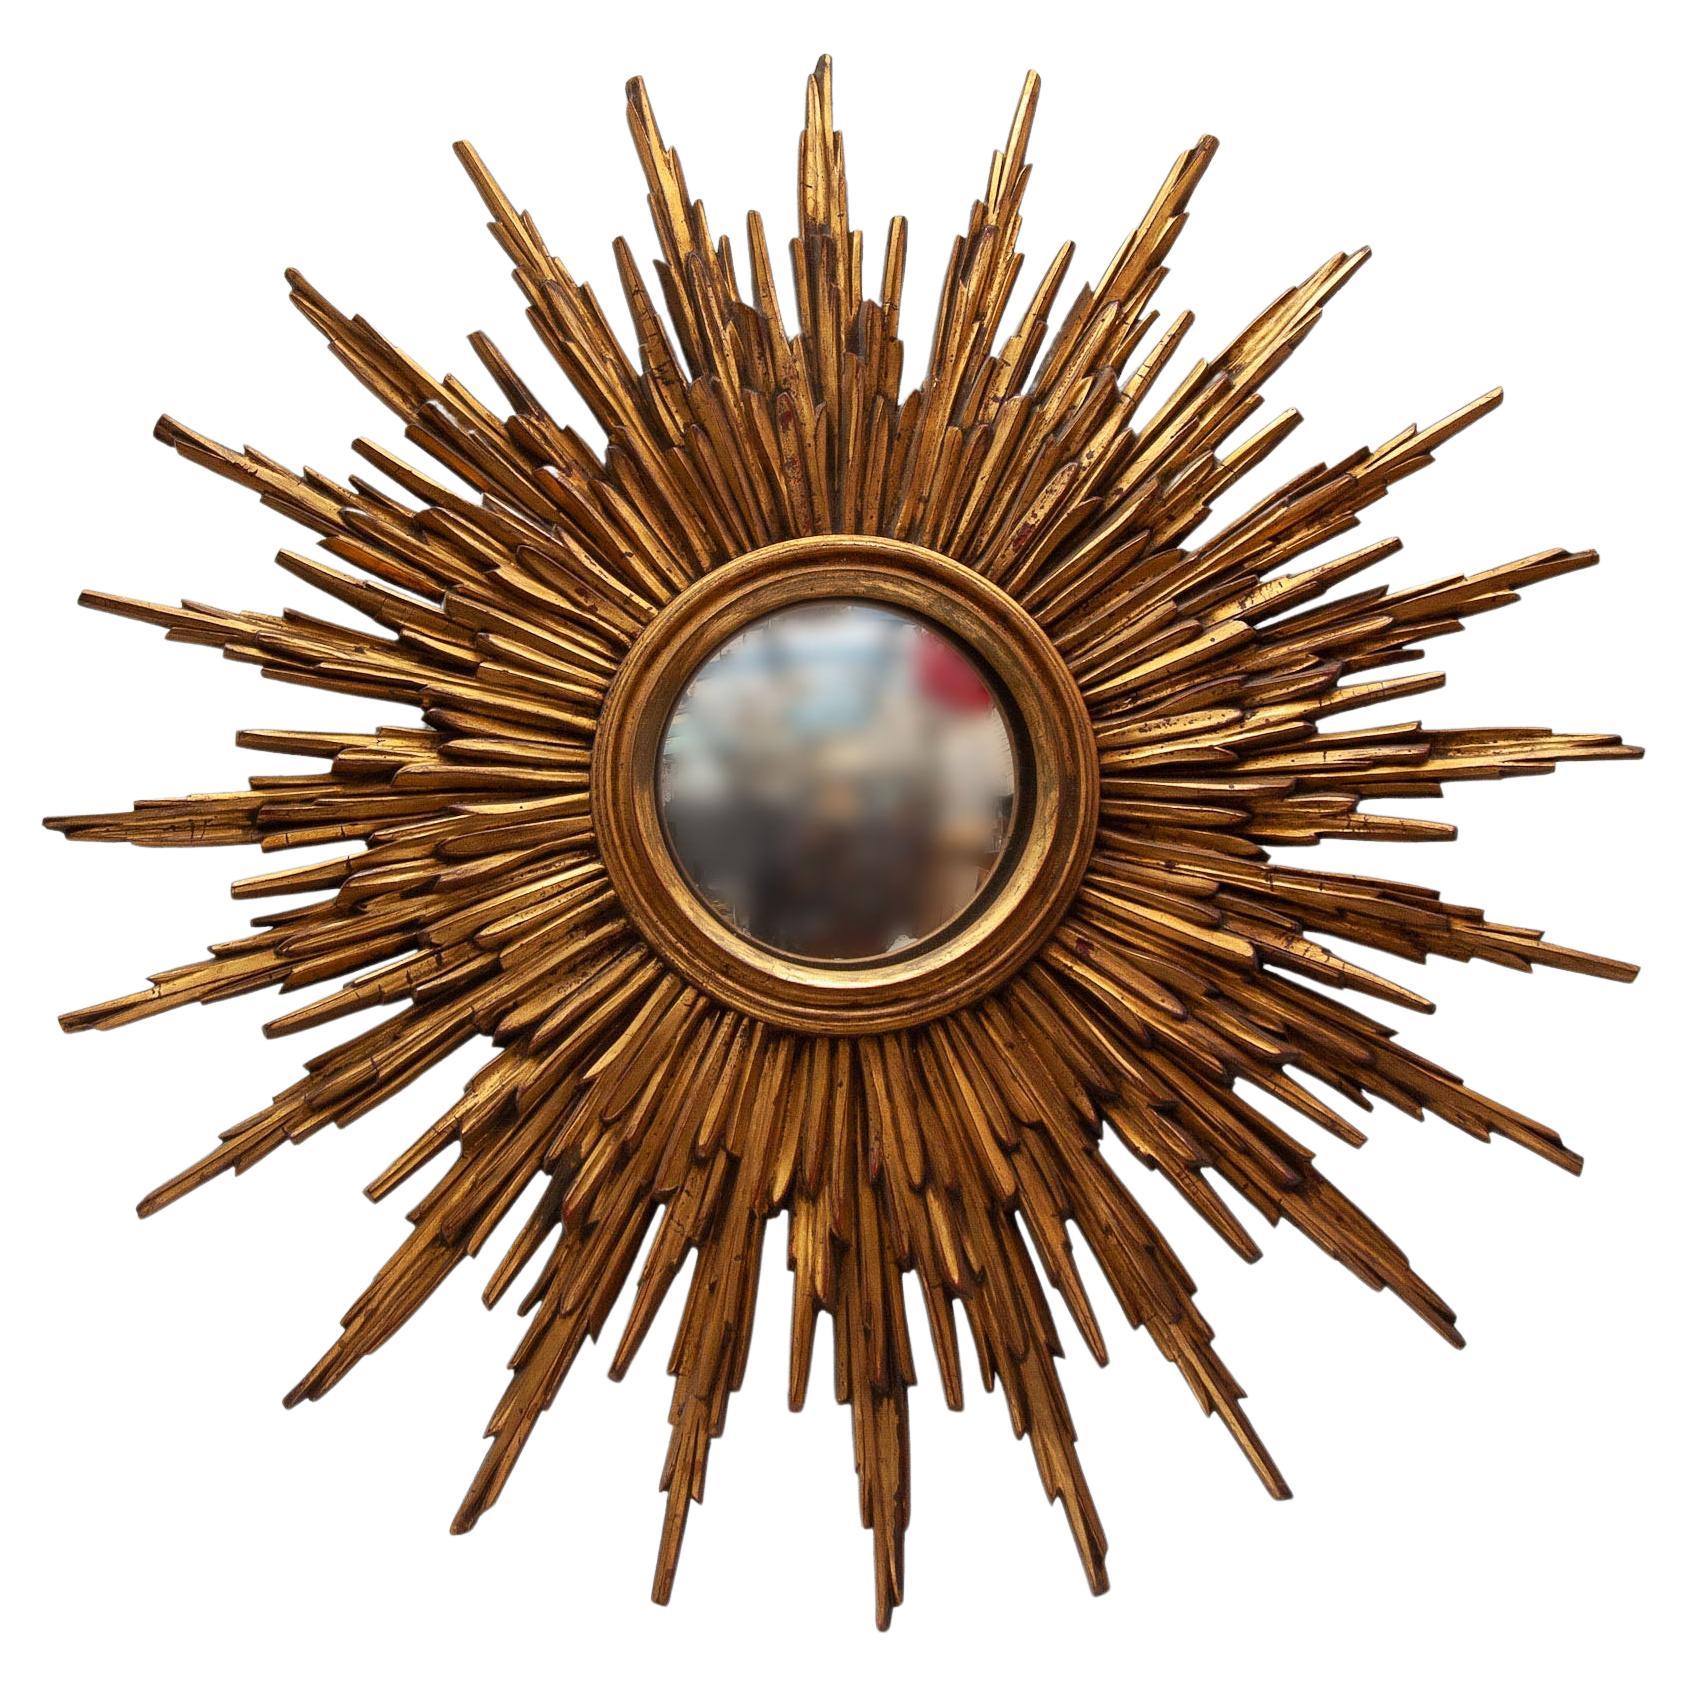 A vintage French gilt wood sunburst mirror from 1930s, with layered rays and small mirror plate. Created in France during art deco period, this sunburst mirror features a central mirror plate surrounded by a cloudy frame resting on a first layer of